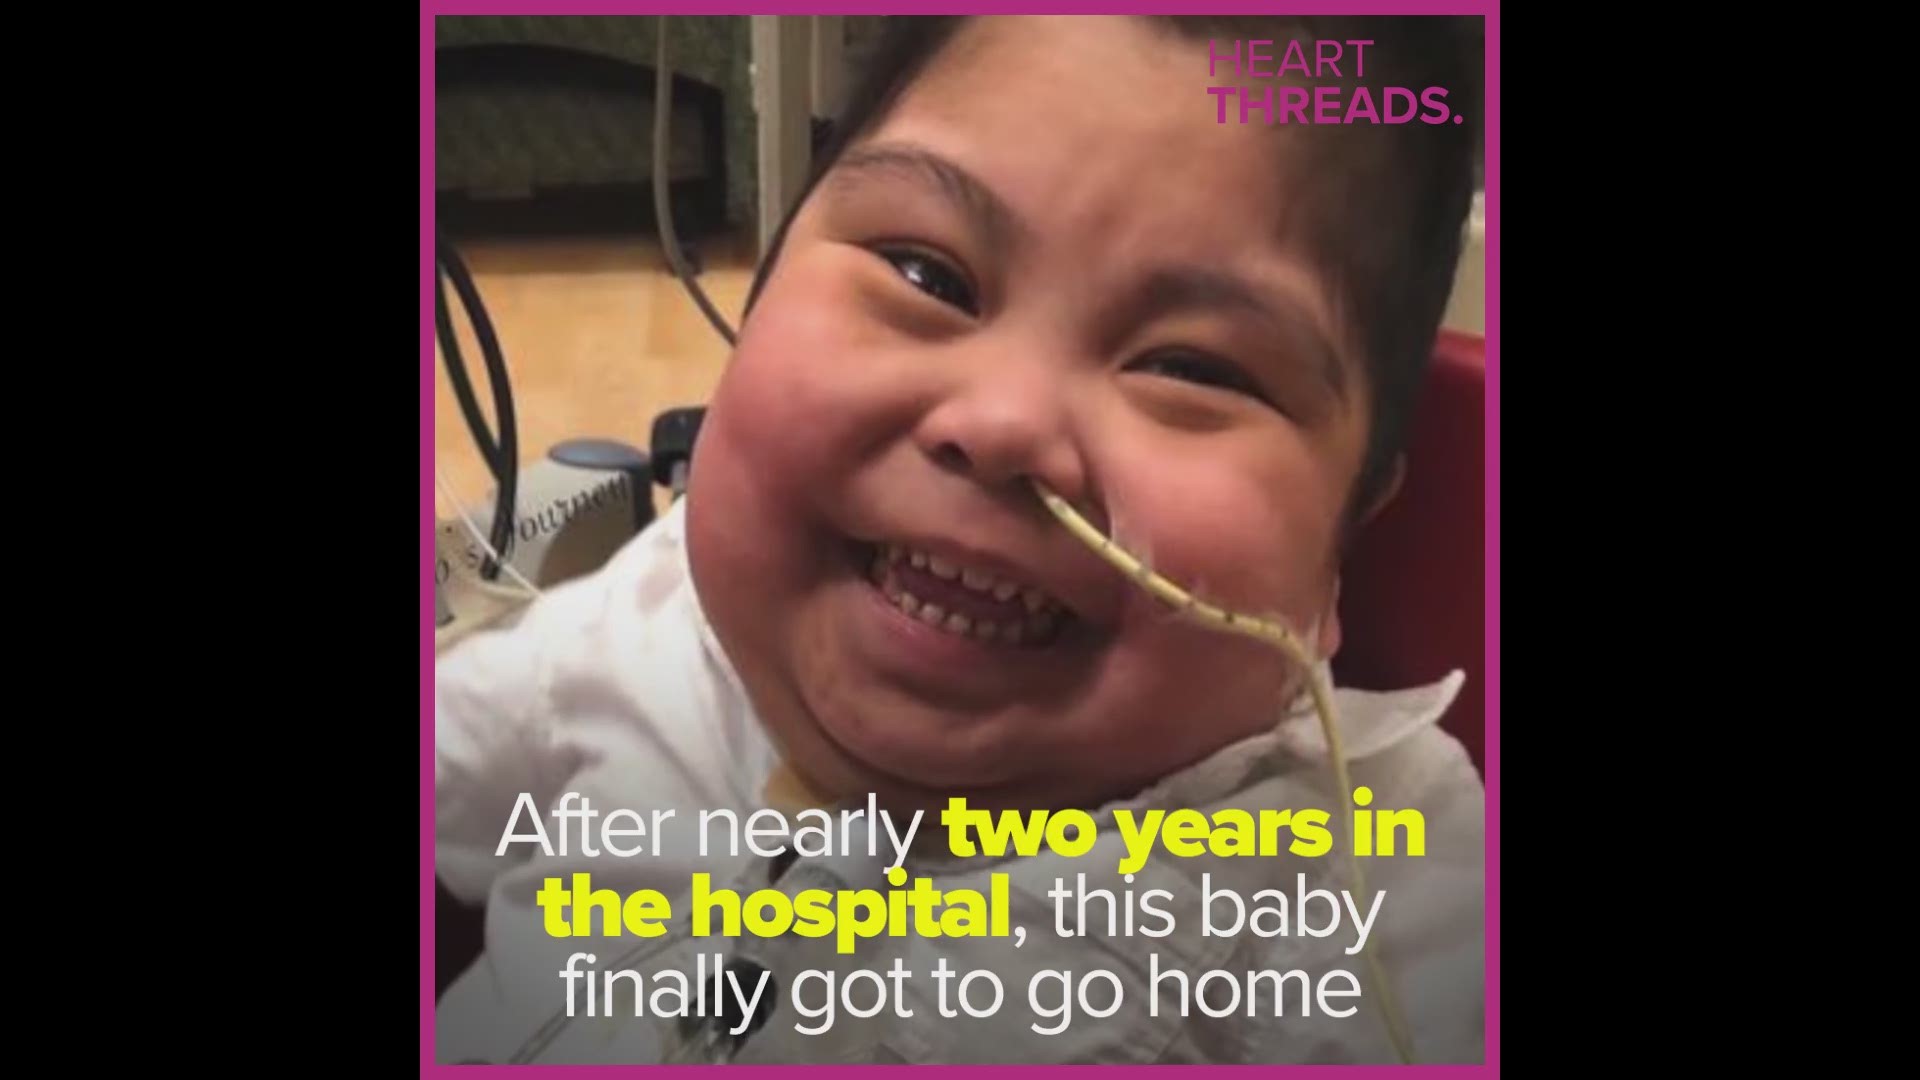 Olga and her husband struggled for a long time to have a baby. When they did, he was born prematurely with a dangerous condition. But after 685 days in the hospital, Olga finally took her baby home.